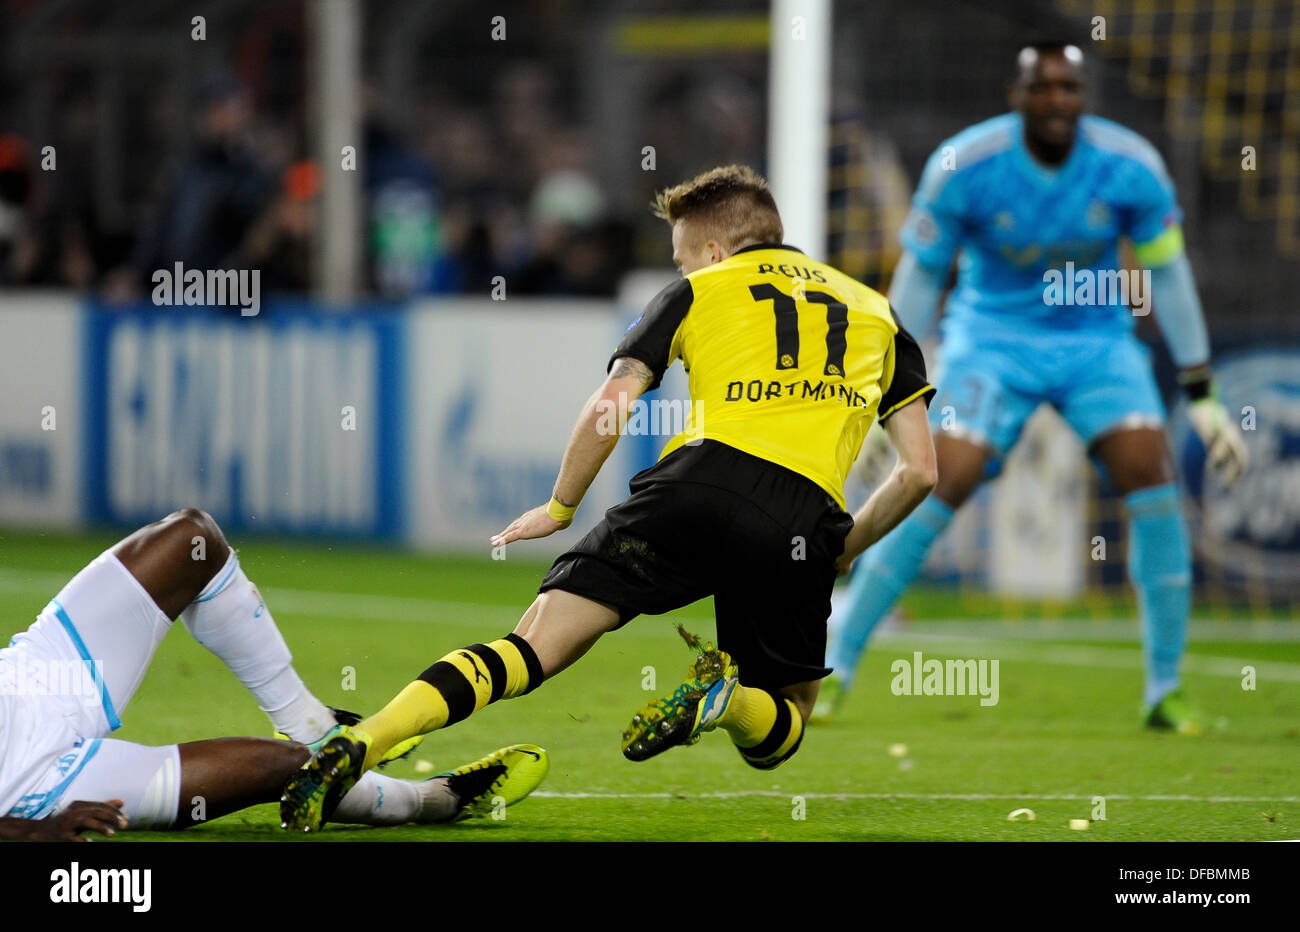 Dortmund, Germany . 01st Oct, 2013. UEFA Champions League 2013/14, 1.10.2013, Group phase, 2nd matchday, Signal Iduna Arena, Dortmund, Borussia Dortmund- Olympique Marseille ---- Marco Reus (BVB) falls in the penalty area after a foul by Nicolas Nkoulou. right: Steve Mandanda © kolvenbach/Alamy Live News Stock Photo